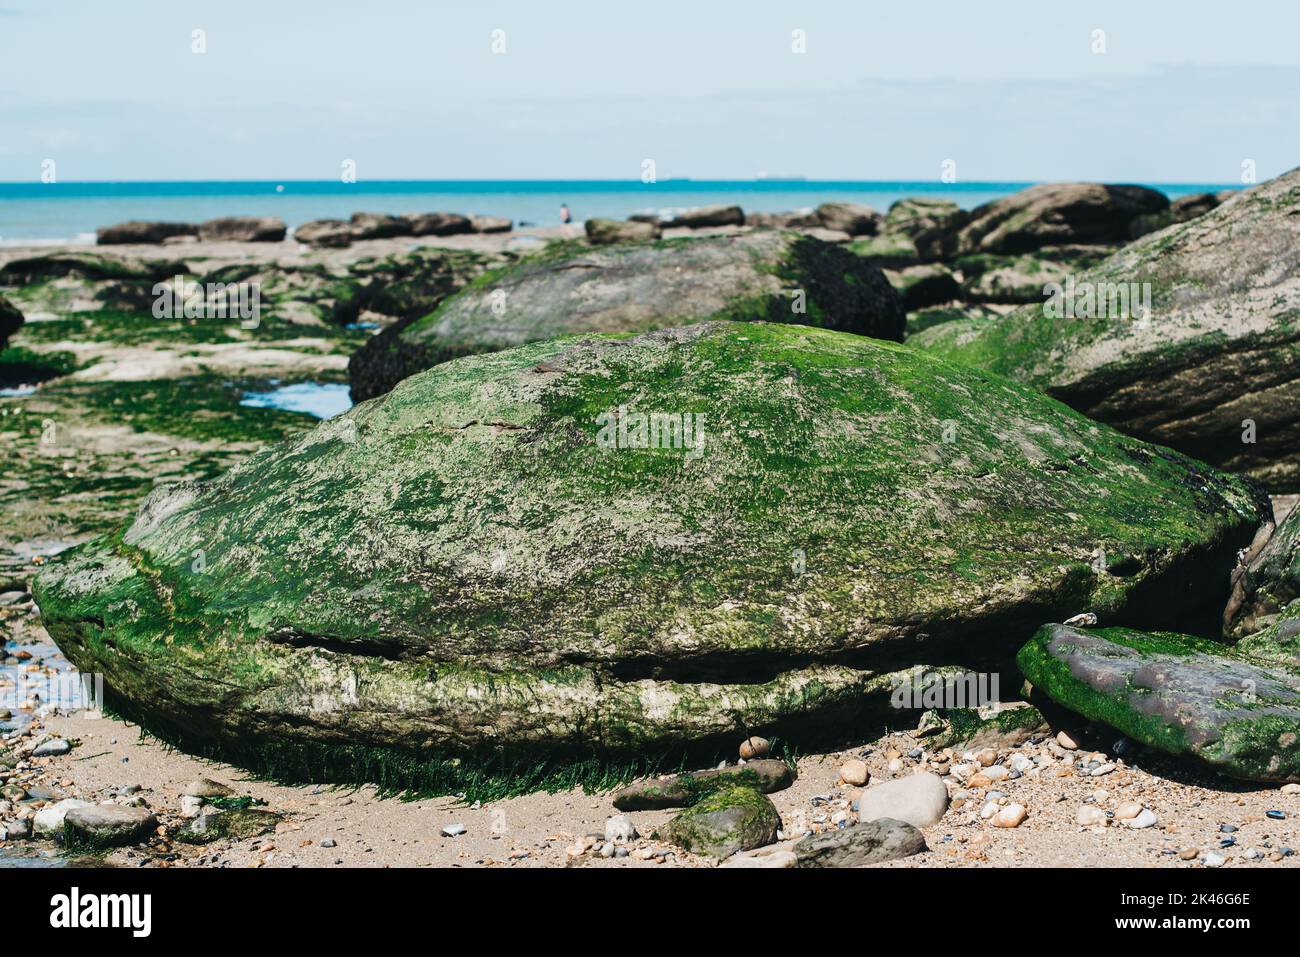 A rock covered in seaweed on the Northern French coast at Audresselles Stock Photo